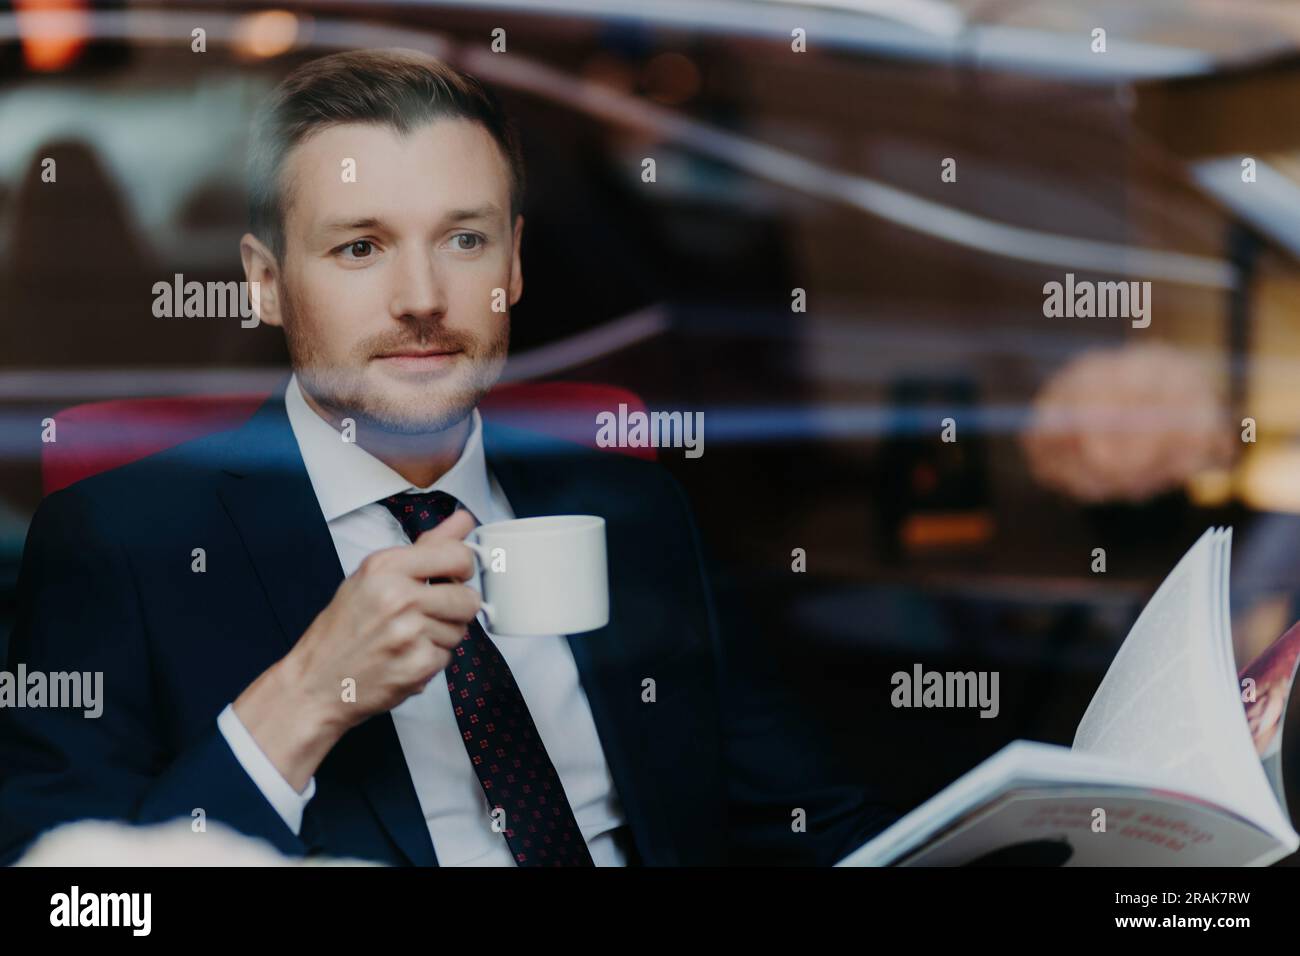 Handsome boss in luxury restaurant, holds cup, looks through menu, formal suit, deep in thought Stock Photo